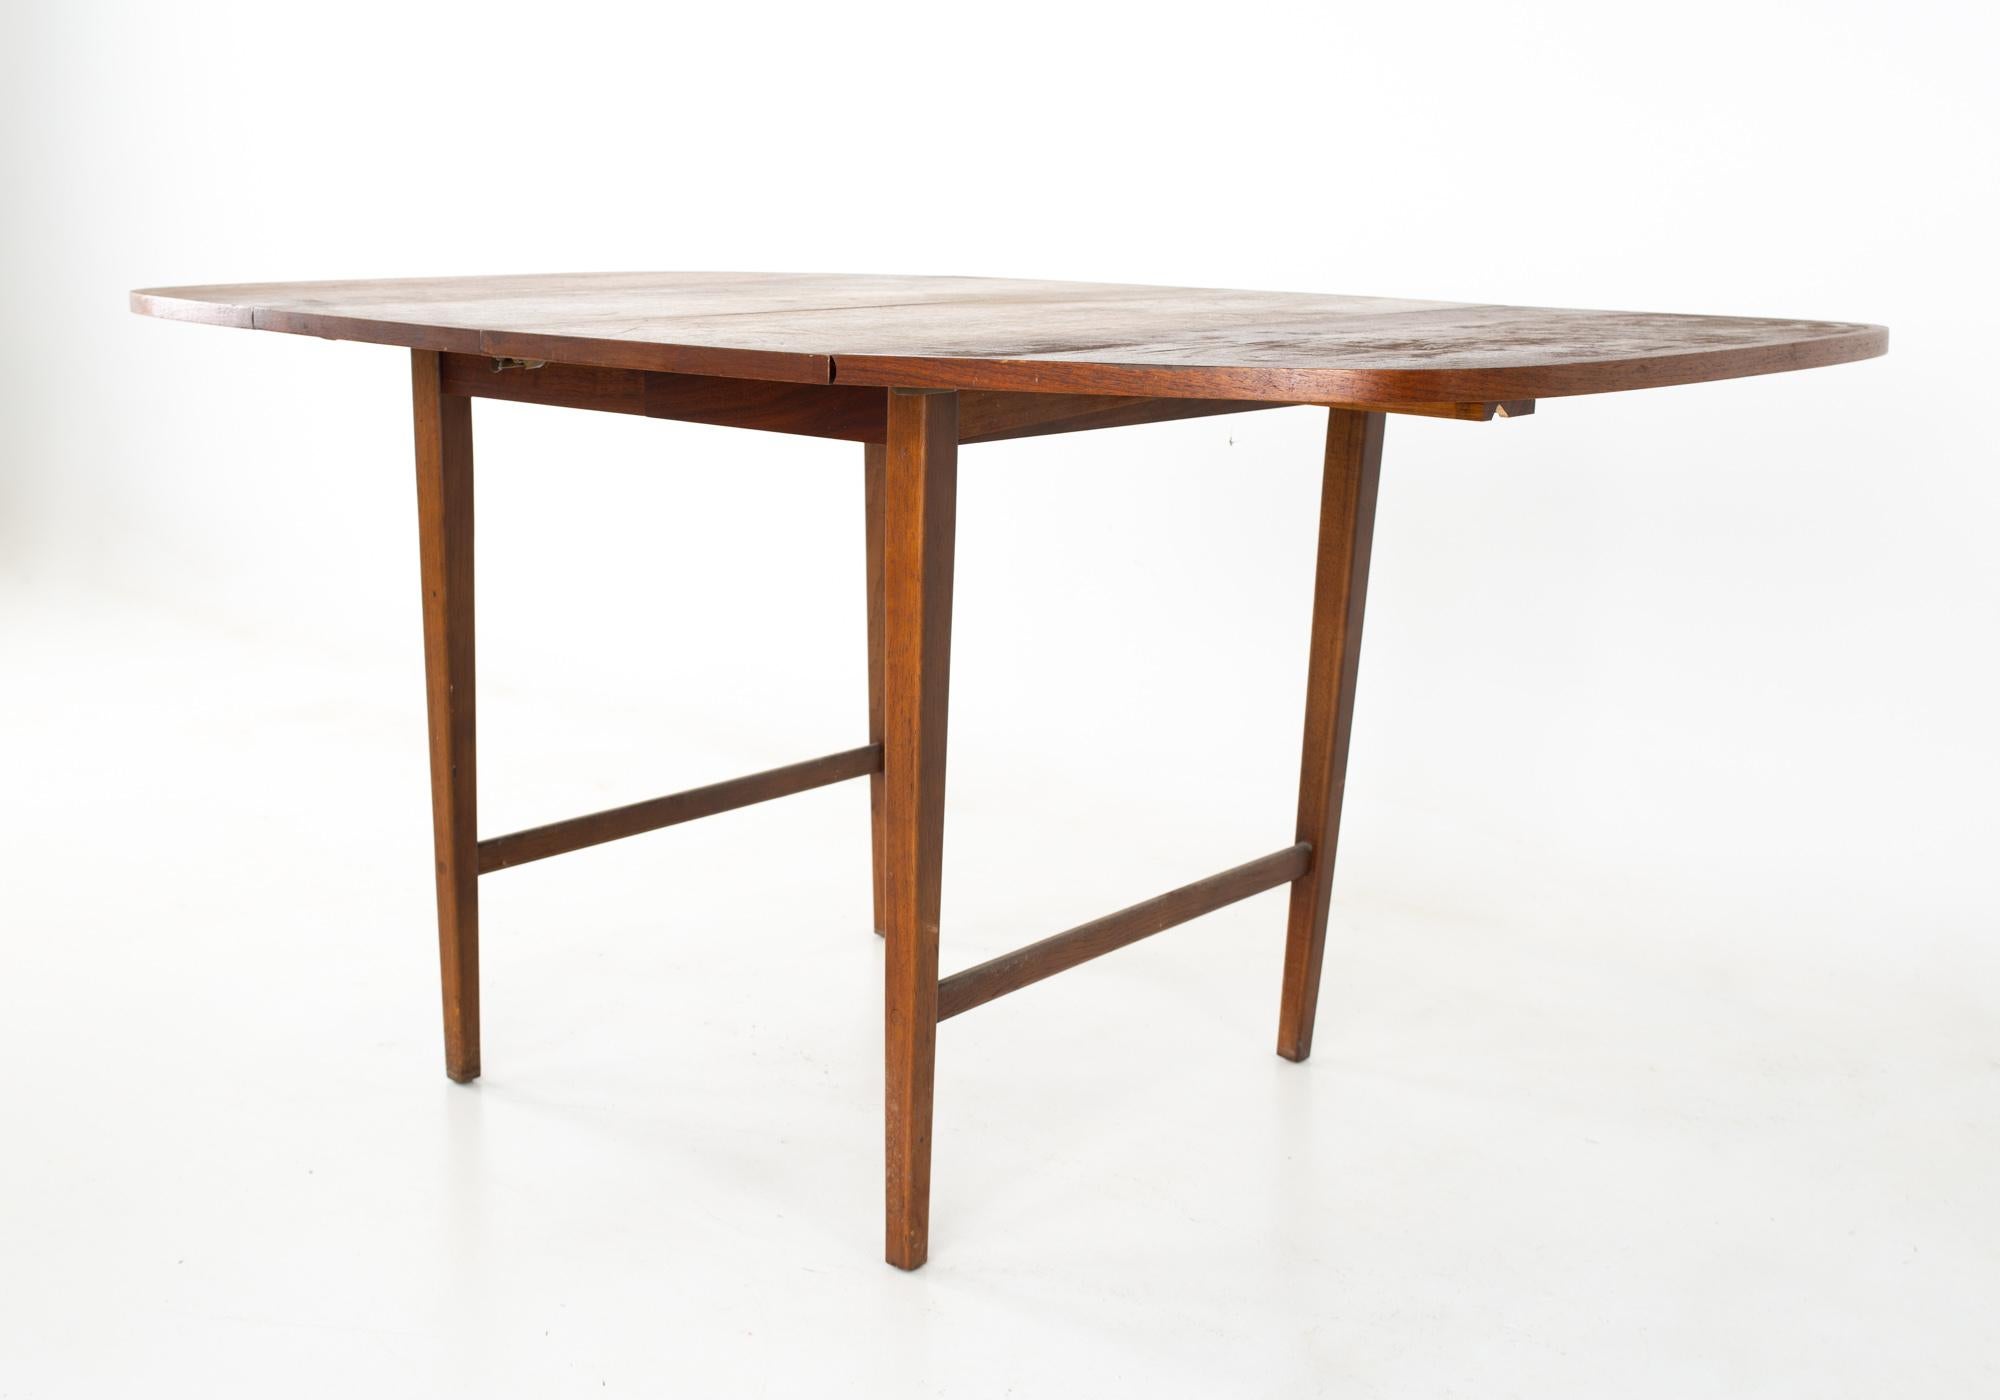 Paul McCobb for Lane Mid Century walnut drop leaf dining table
Table measures: 64.25 wide x 38 deep x 29 inches high 

All pieces of furniture can be had in what we call restored vintage condition. That means the piece is restored upon purchase so